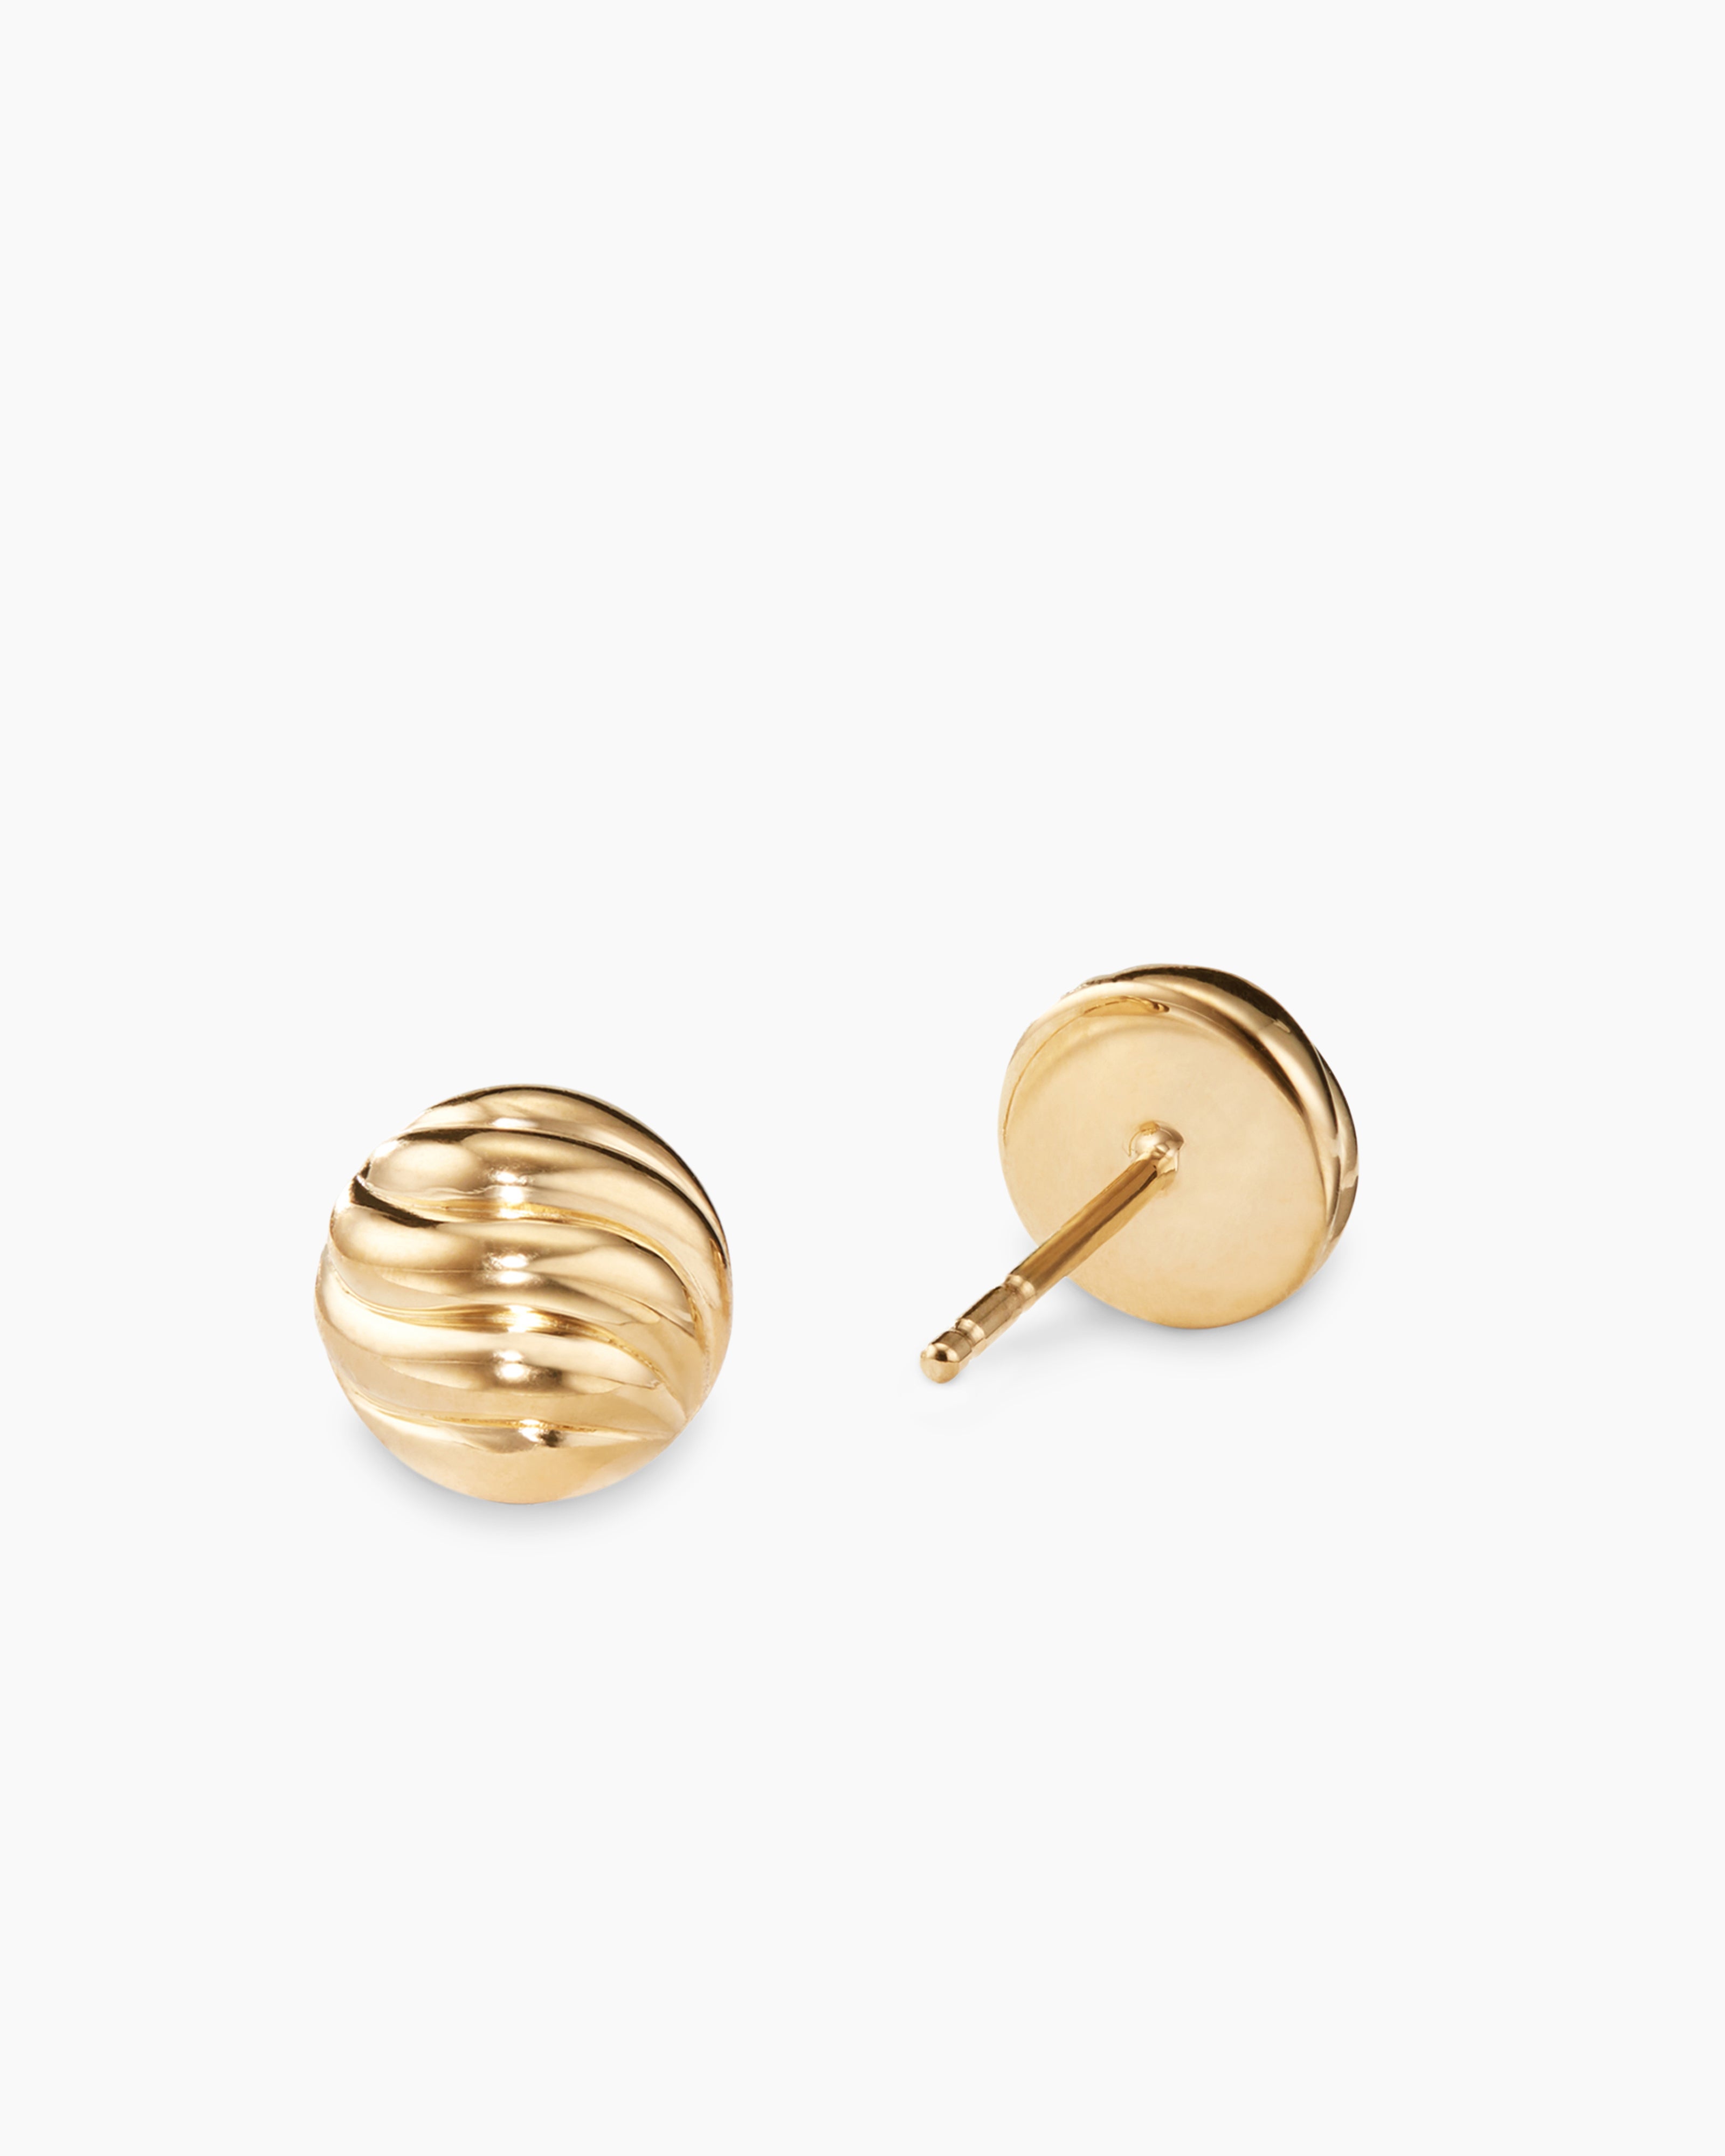 Finely Detailed Everyday Wear 22KT Gold Studs